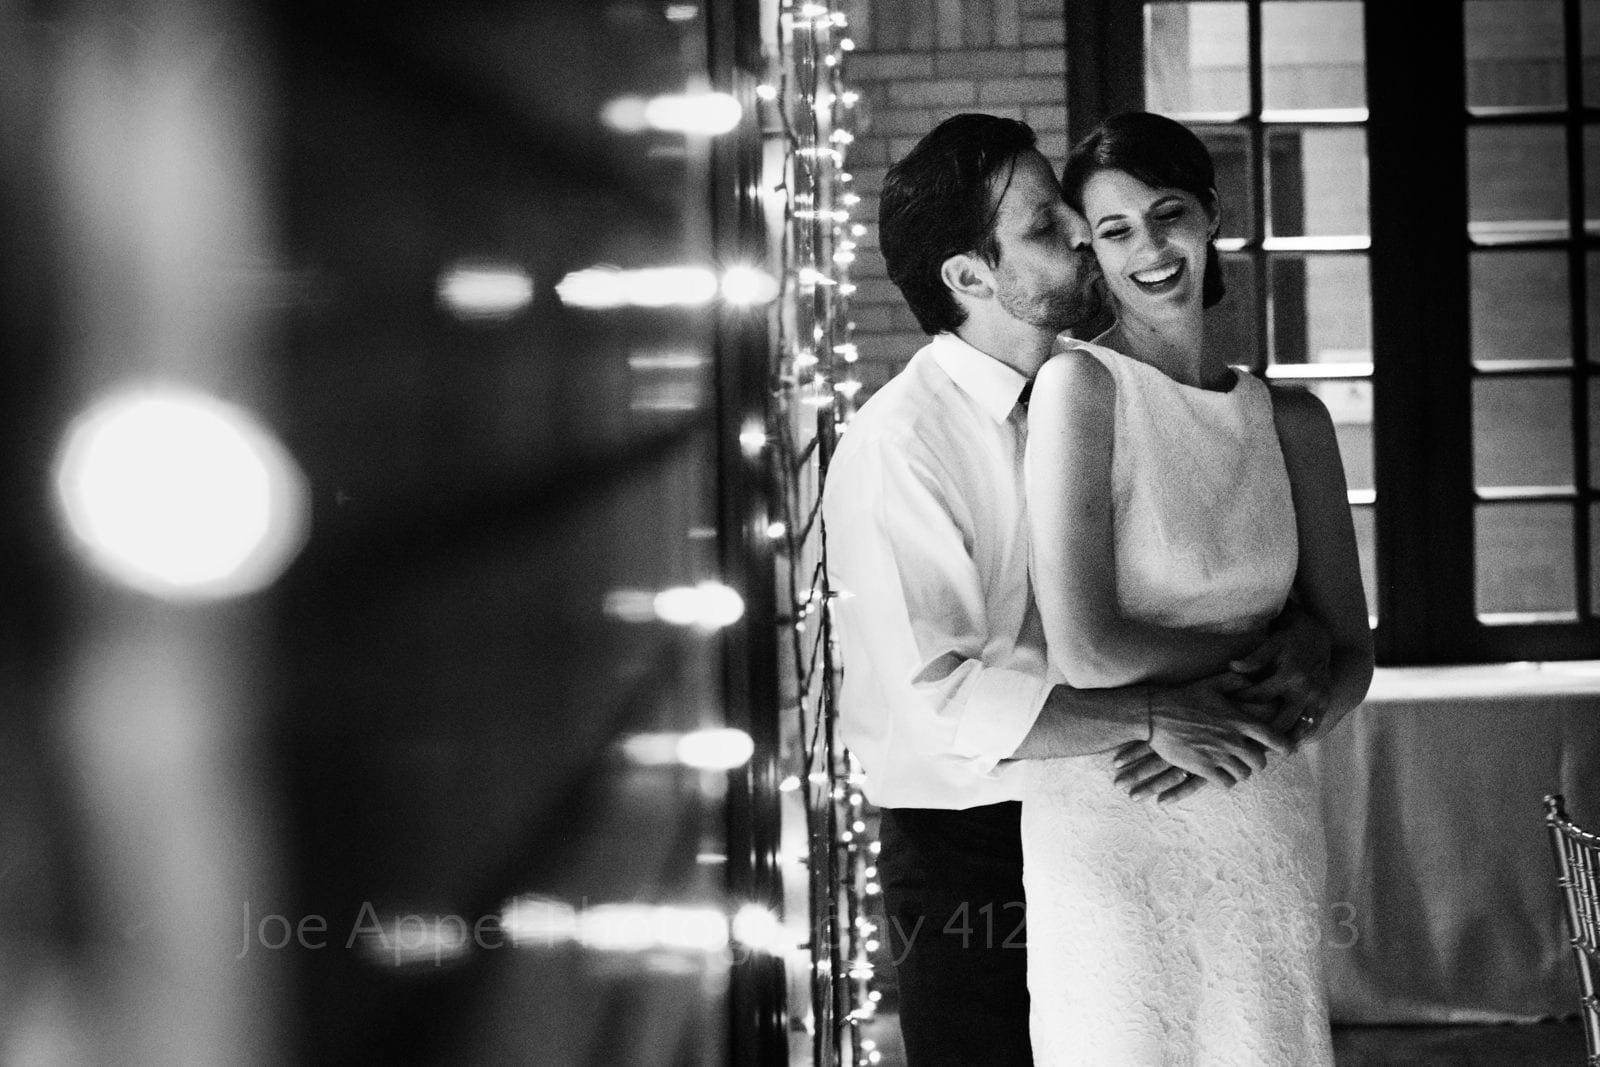 With twinkle lights in the foreground, a groom embraces his smiling bride and kisses her on the cheek during their St Francis Hall Washington DC wedding.